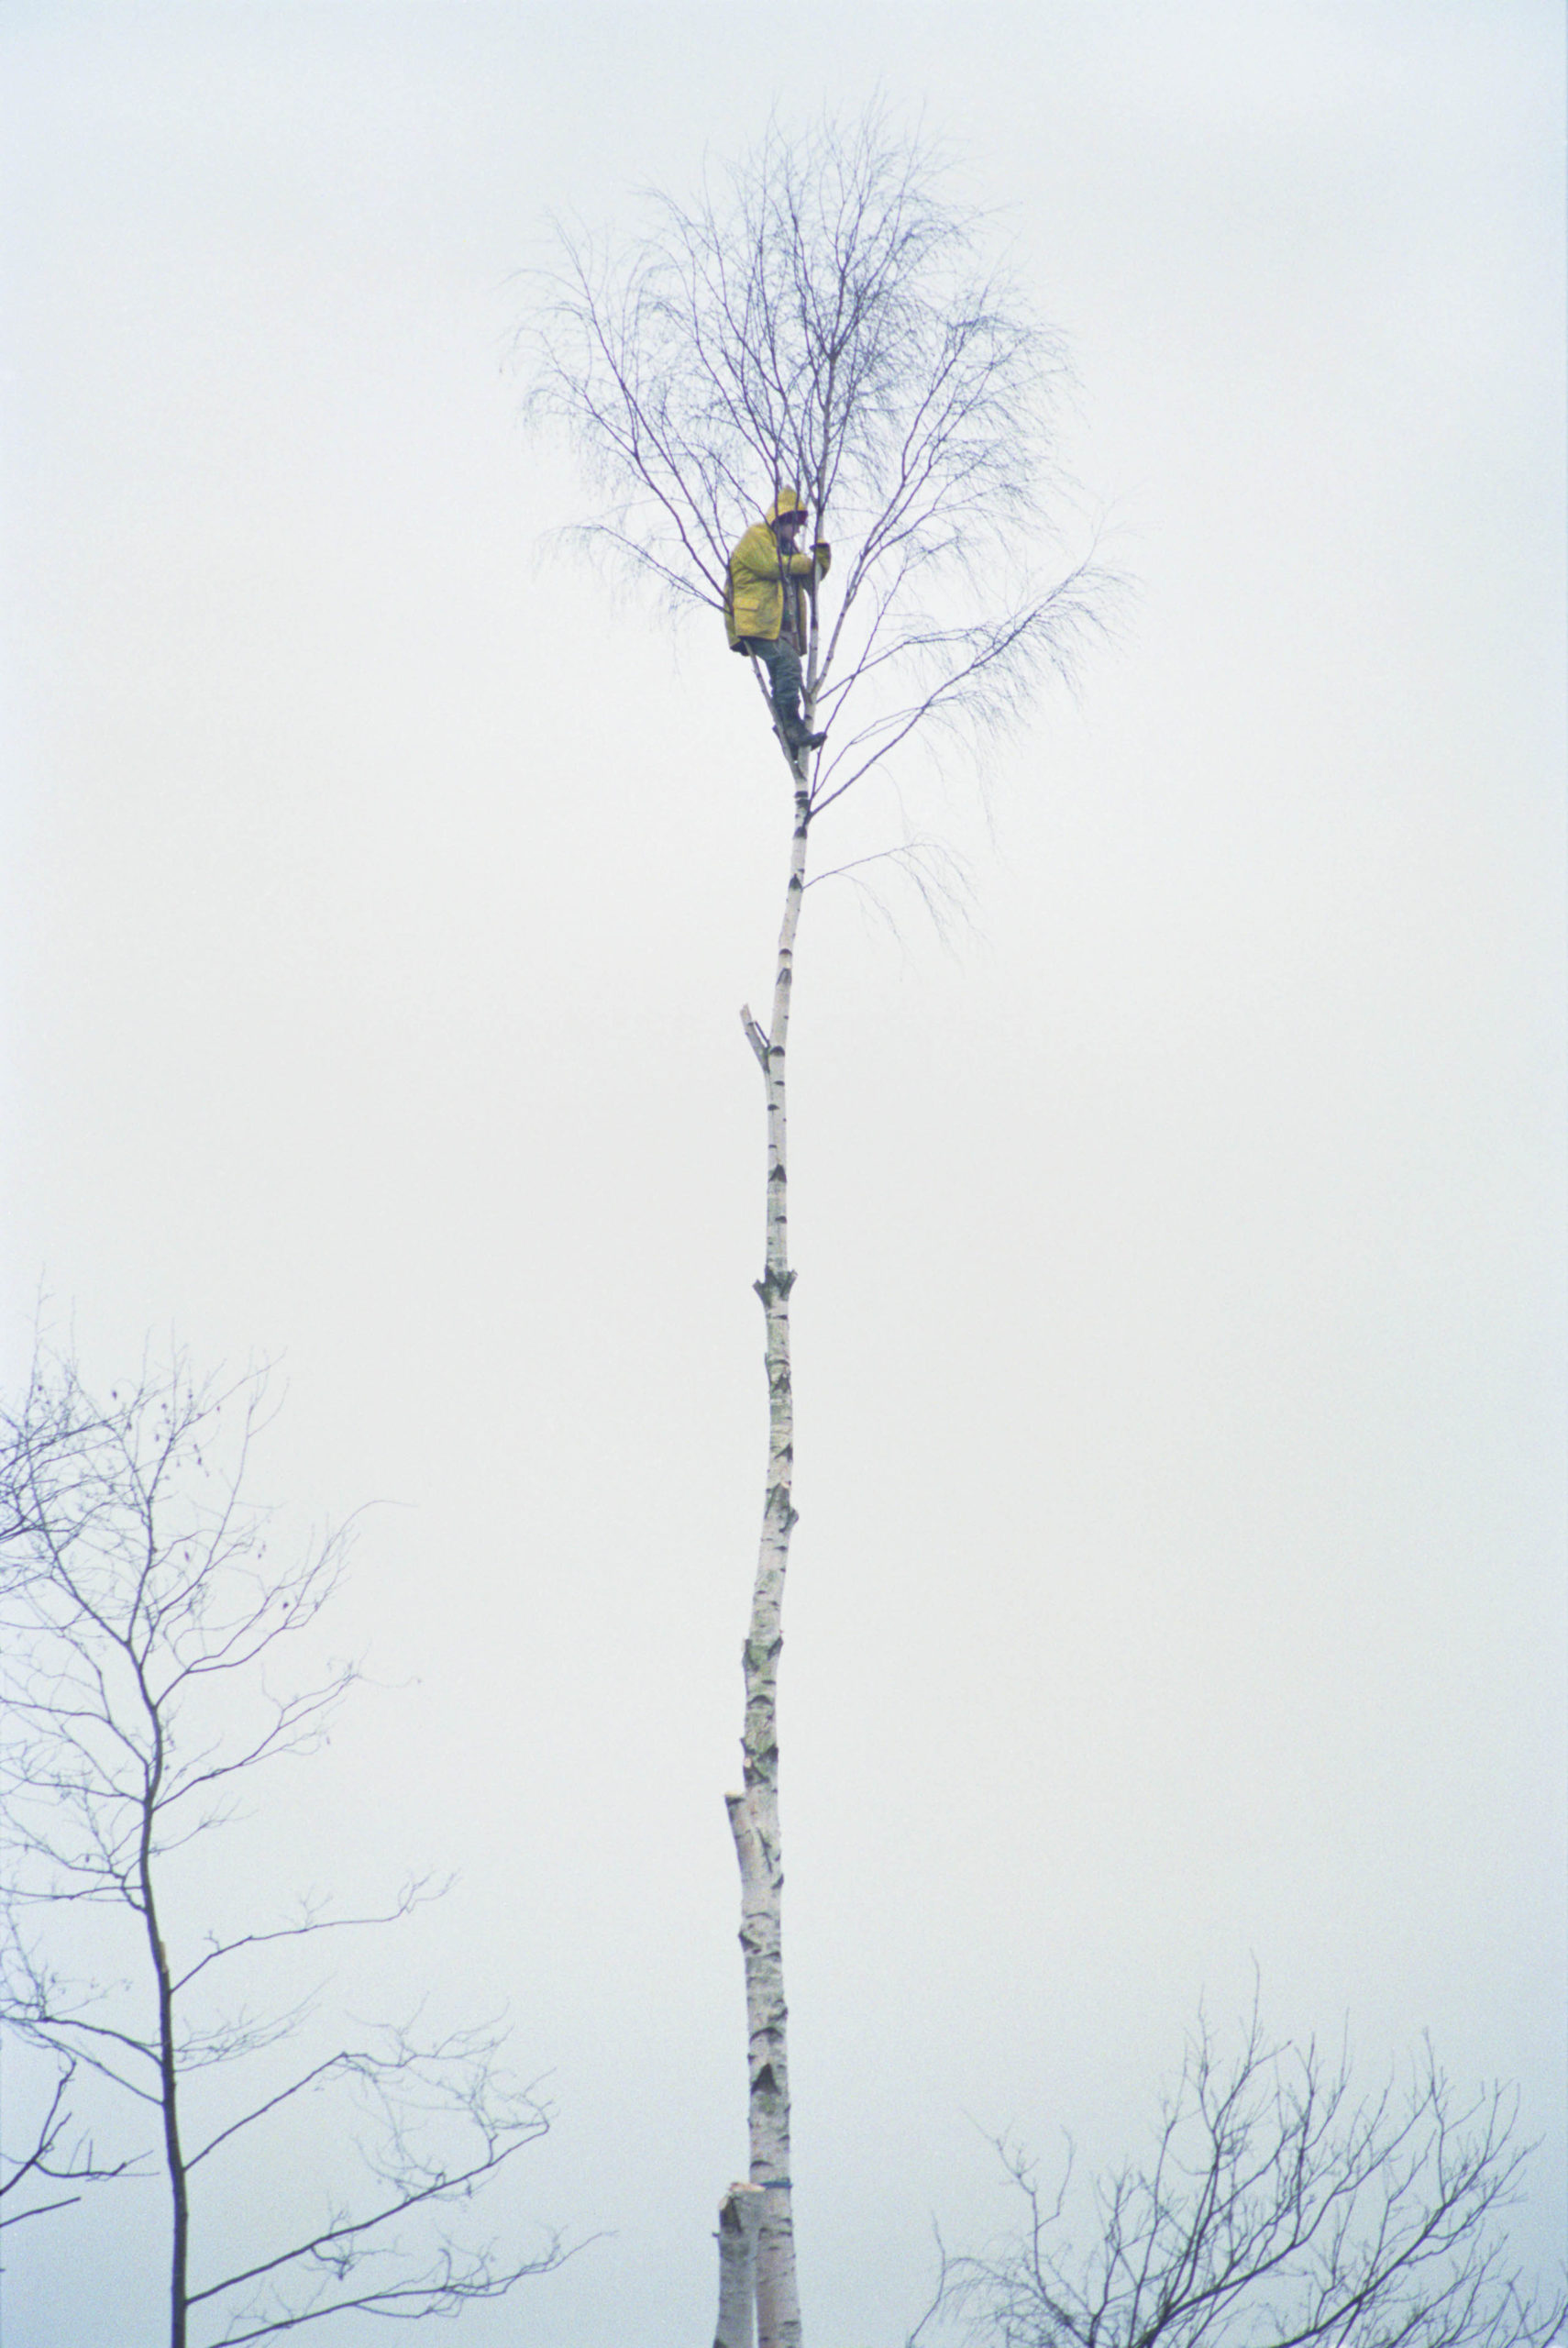 One woman in yellow stands on a small branch very high up a silver birch tree. Historical photograph